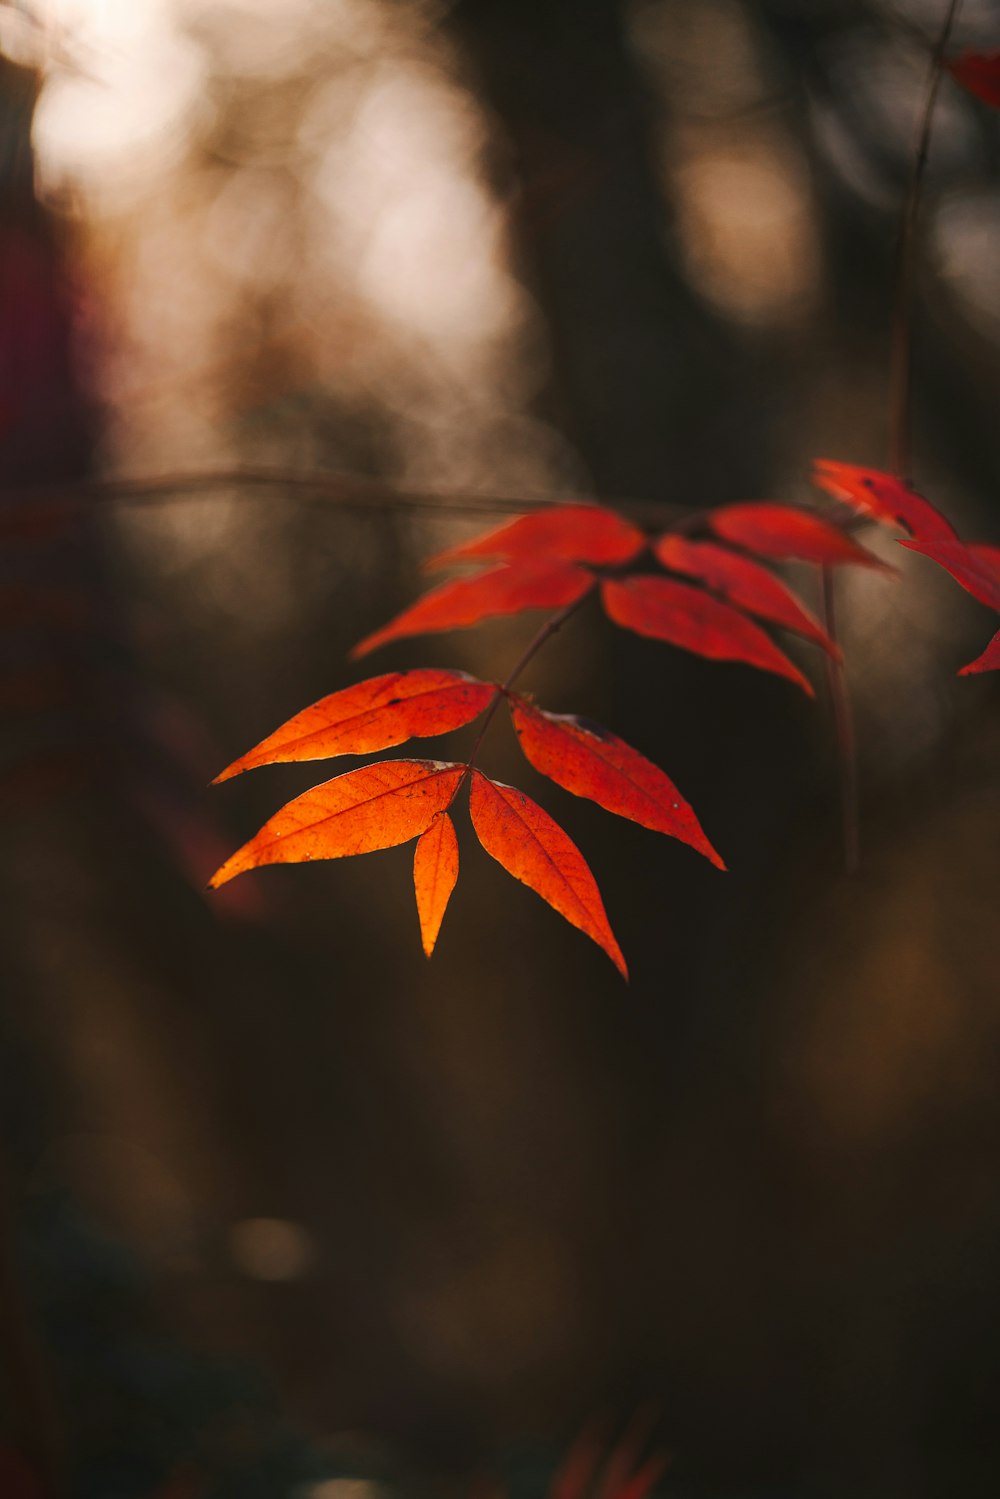 a close up of a red leaf on a tree